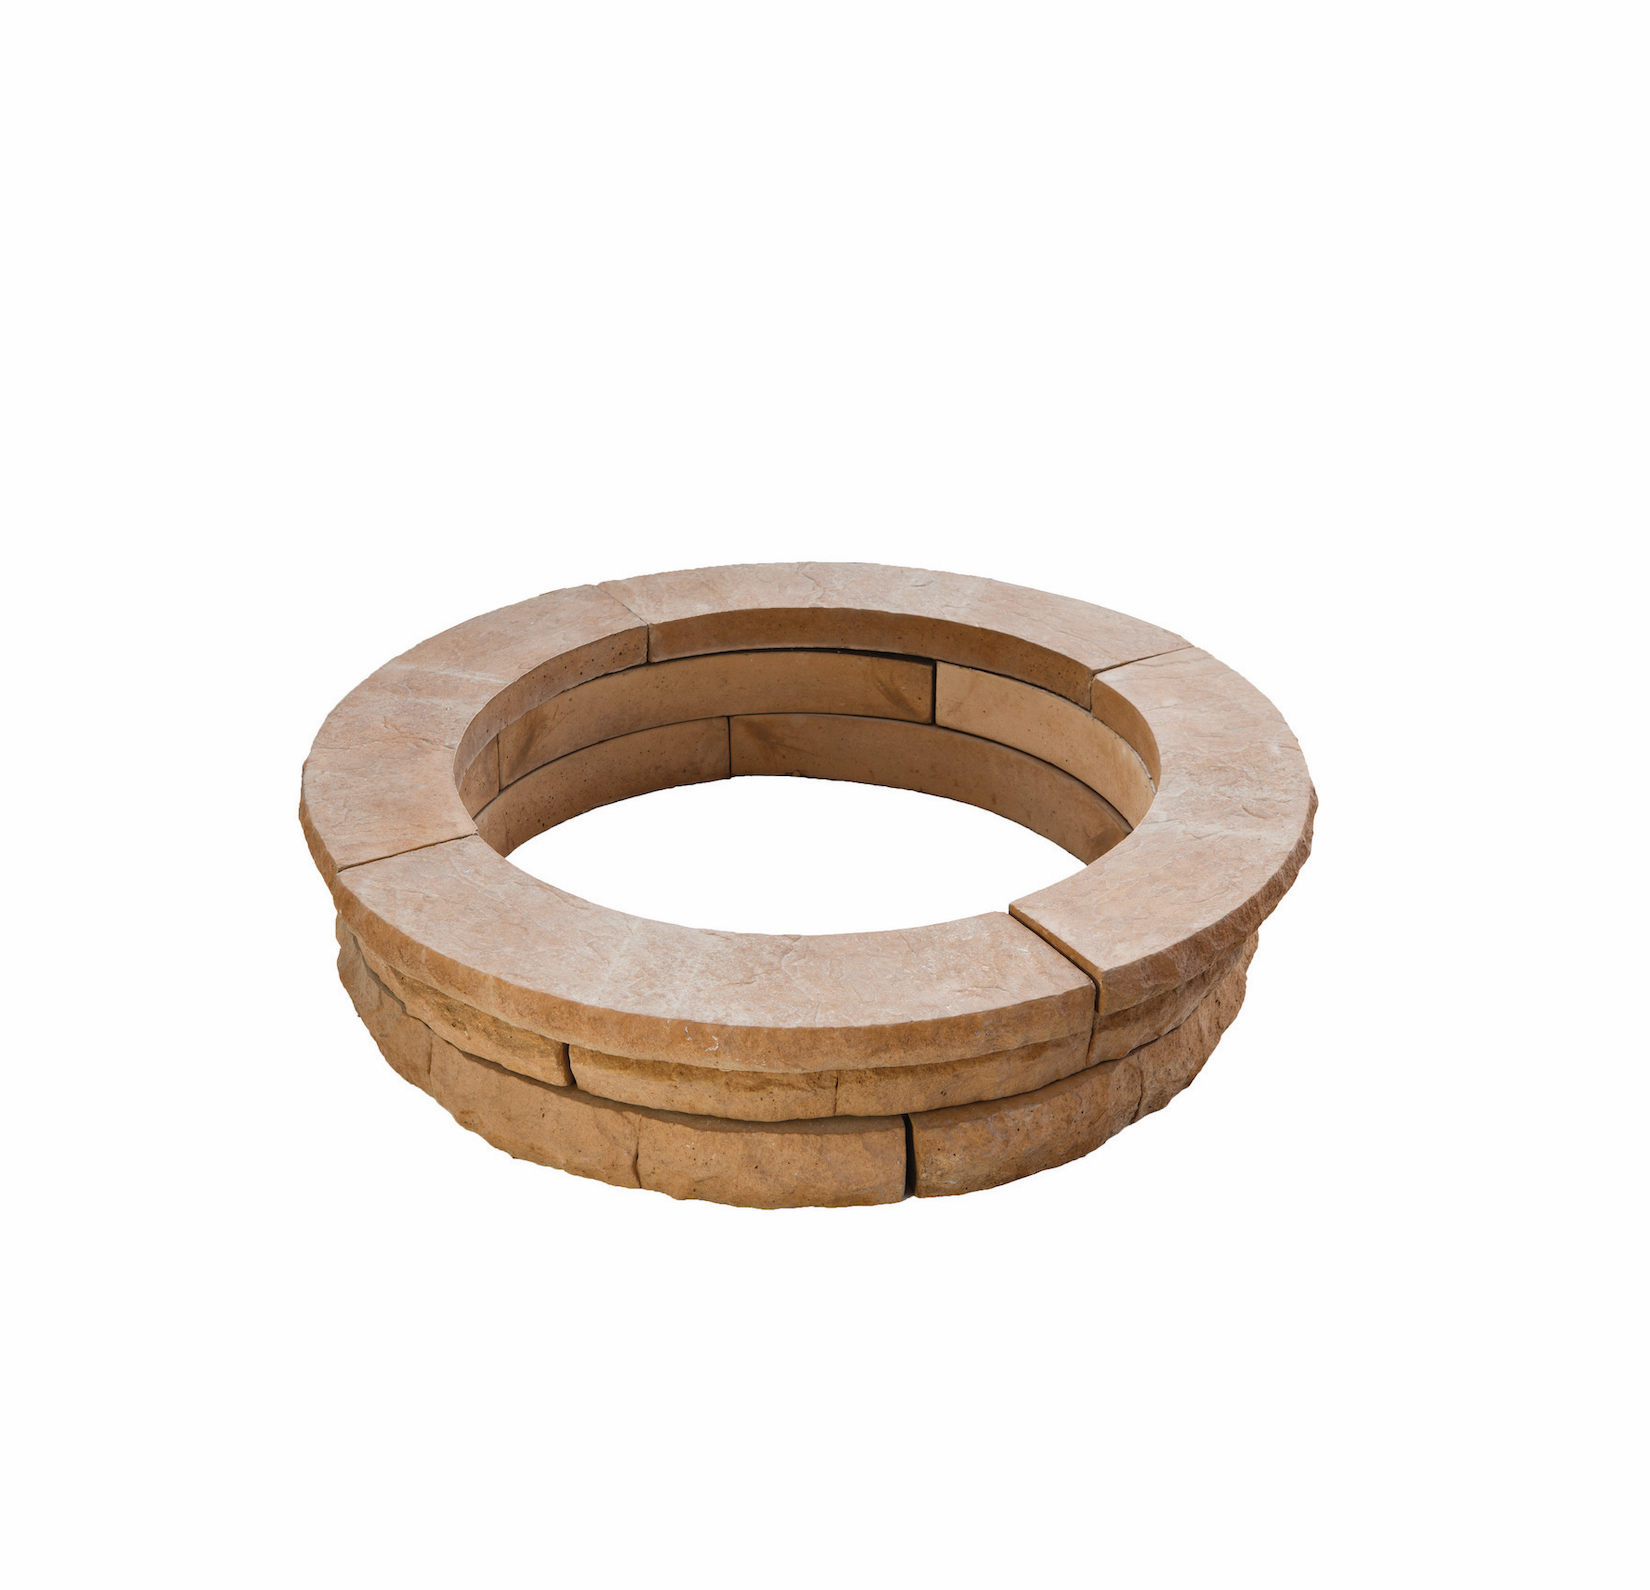 Product Image Test - Fire Pits